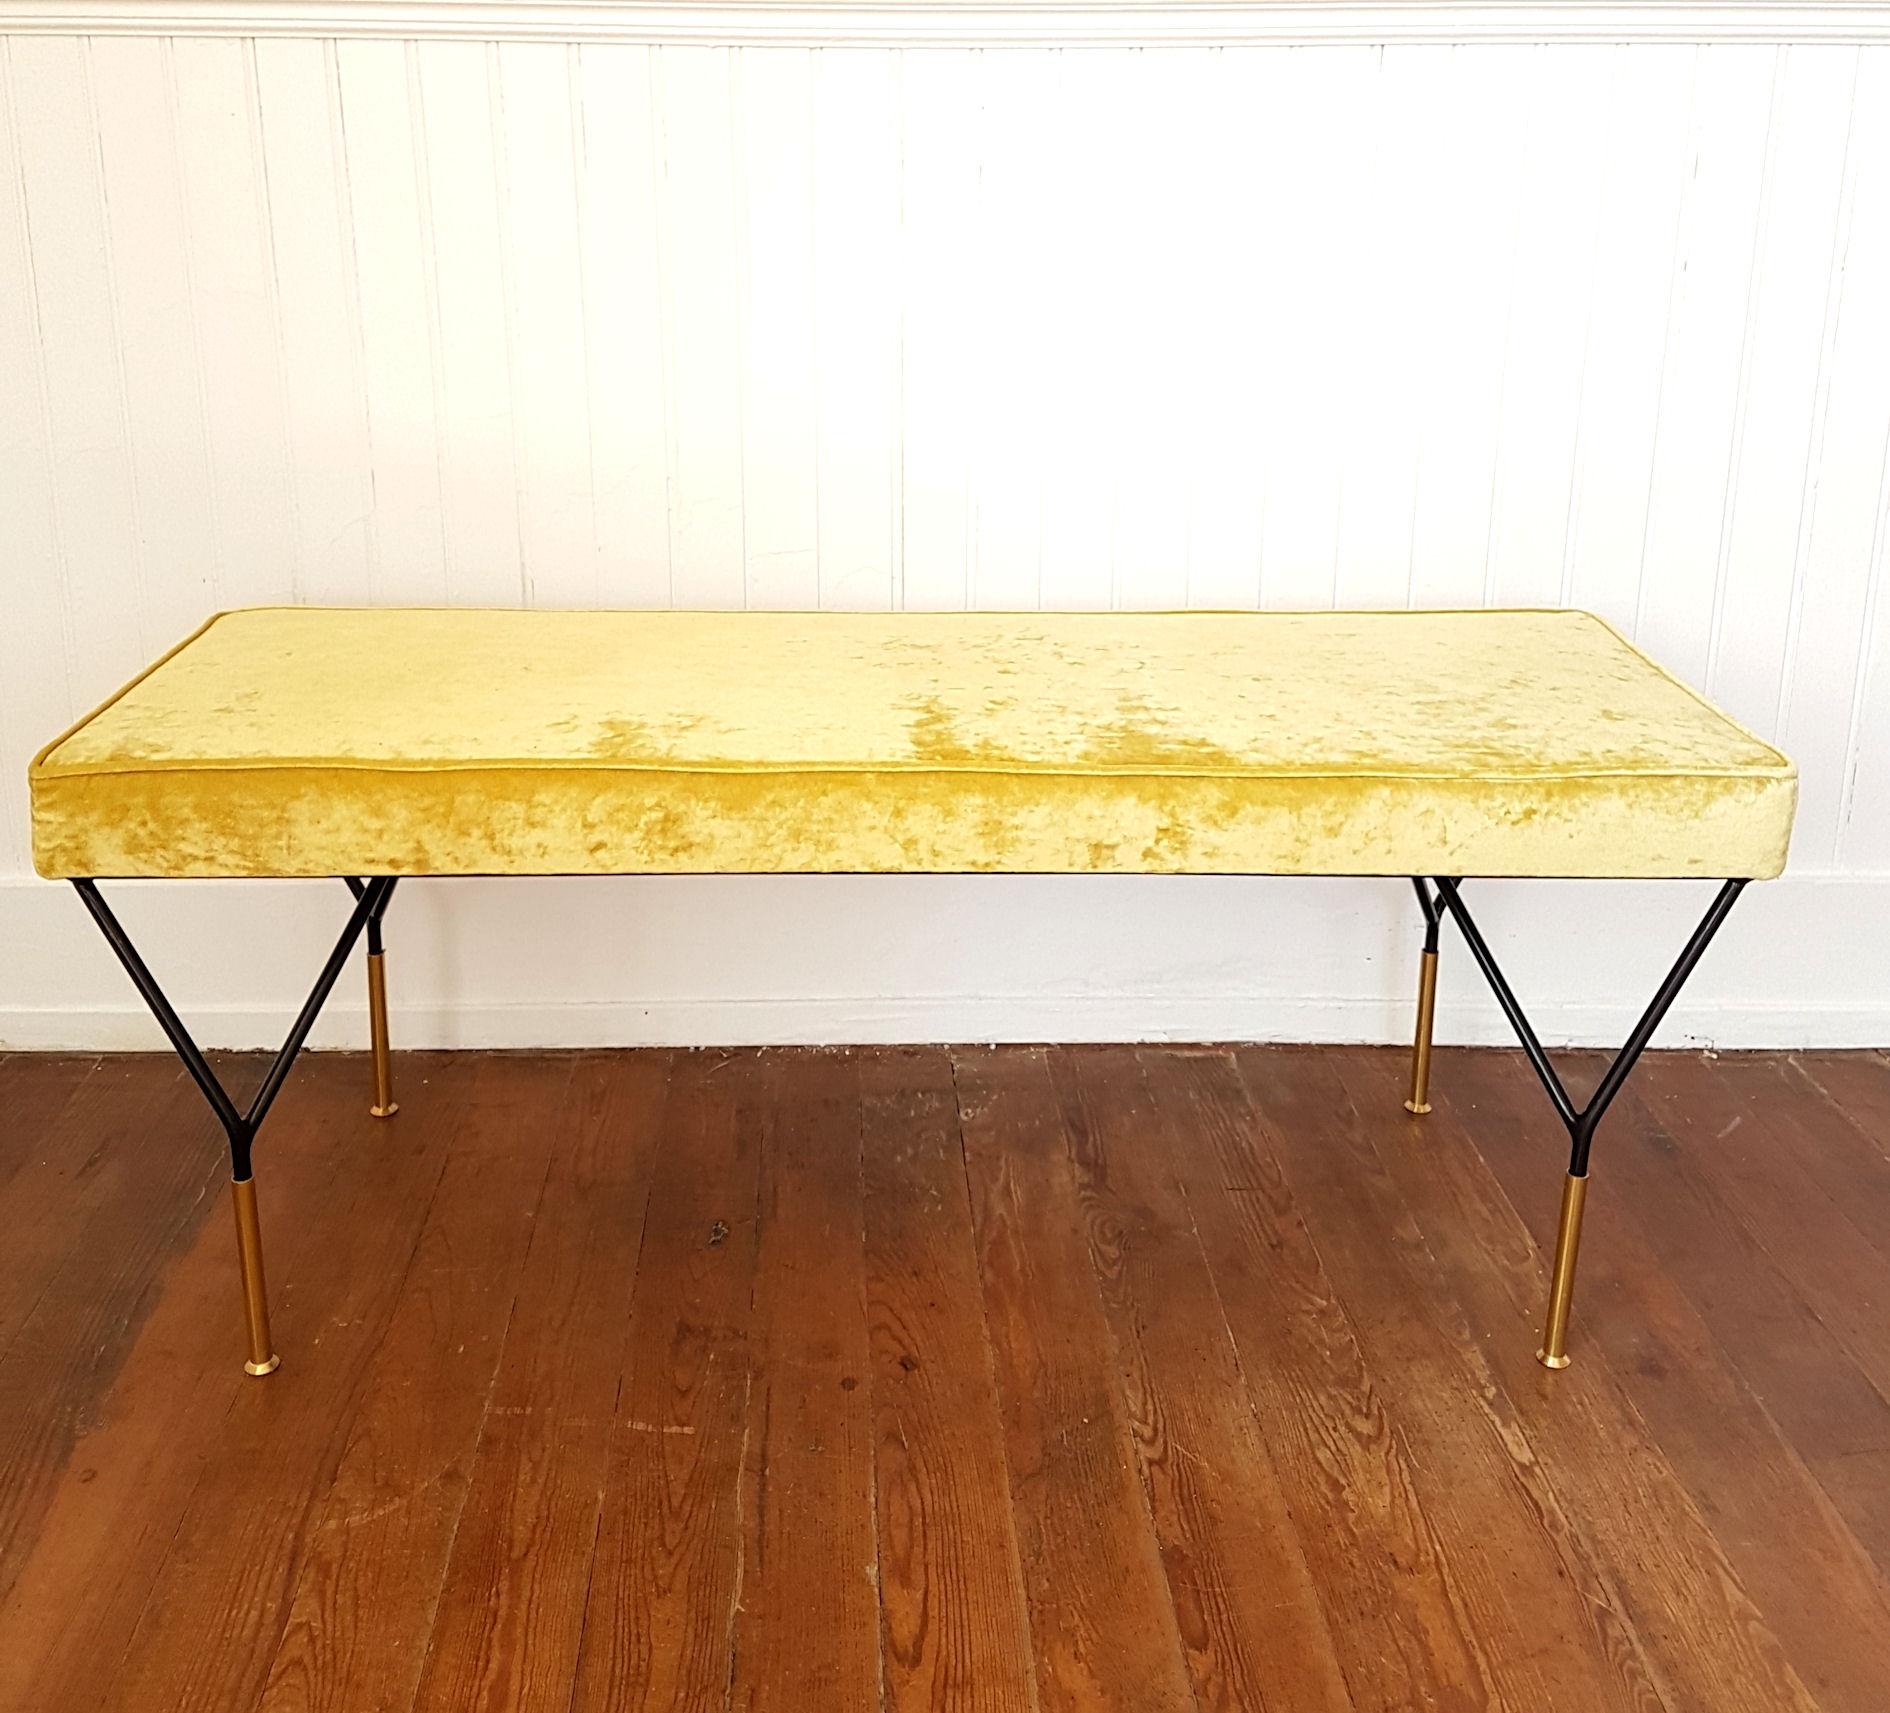 Mid-Century Modern Italian bench, newly upholstered with a yellow velvet.
Legs are in black iron with brass endings.
Italian midcentury style,
Italy, 1980s.